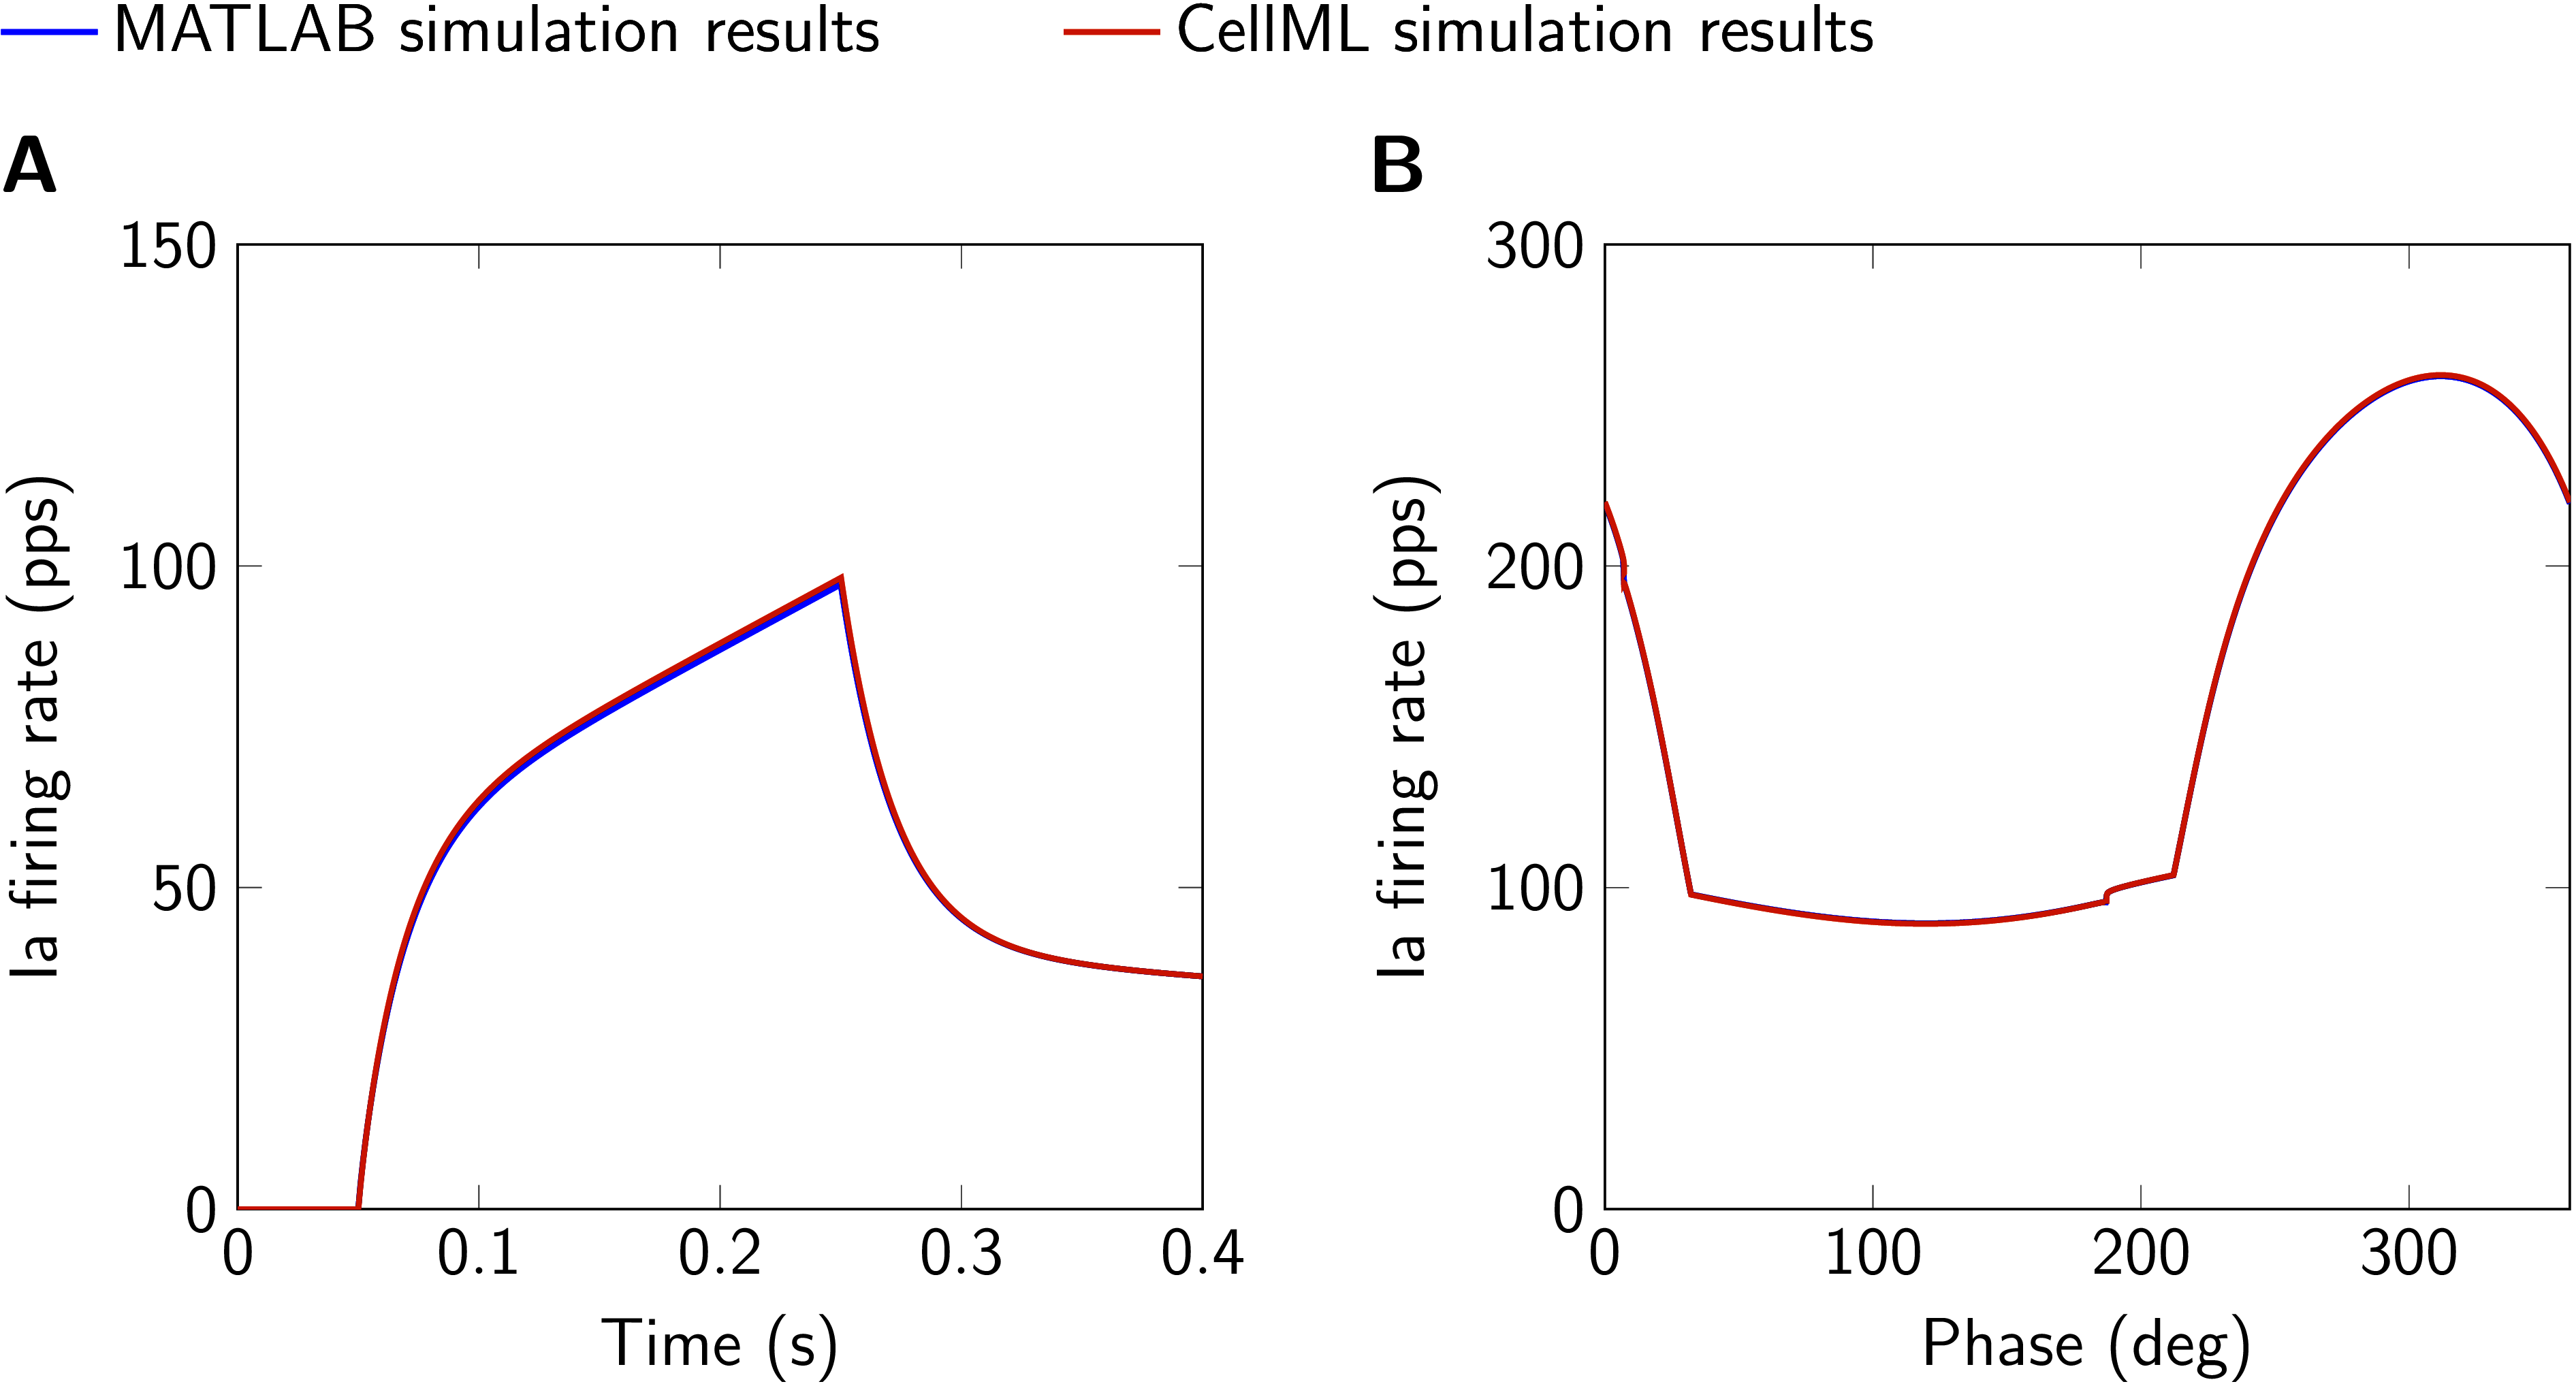 Comparison of simulation results obtained with MATLAB and CellML implementations. A: 6 mm ramp-and-hold stretch, ramp velocity 30 mm s⁻¹, no fusimotor drive. B: Sinusoidal stretch (1.4 mm peak-to-peak, mean displacement 4 mm, frequency 1 Hz, second of two cycles), static gamma drive 50 pps, dynamic gamma drive 125 pps. Ia firing rate and fusimotor drive are given in pulses per second (pps). This figure is created by running both, Fig03.sedml and Fig03.m.